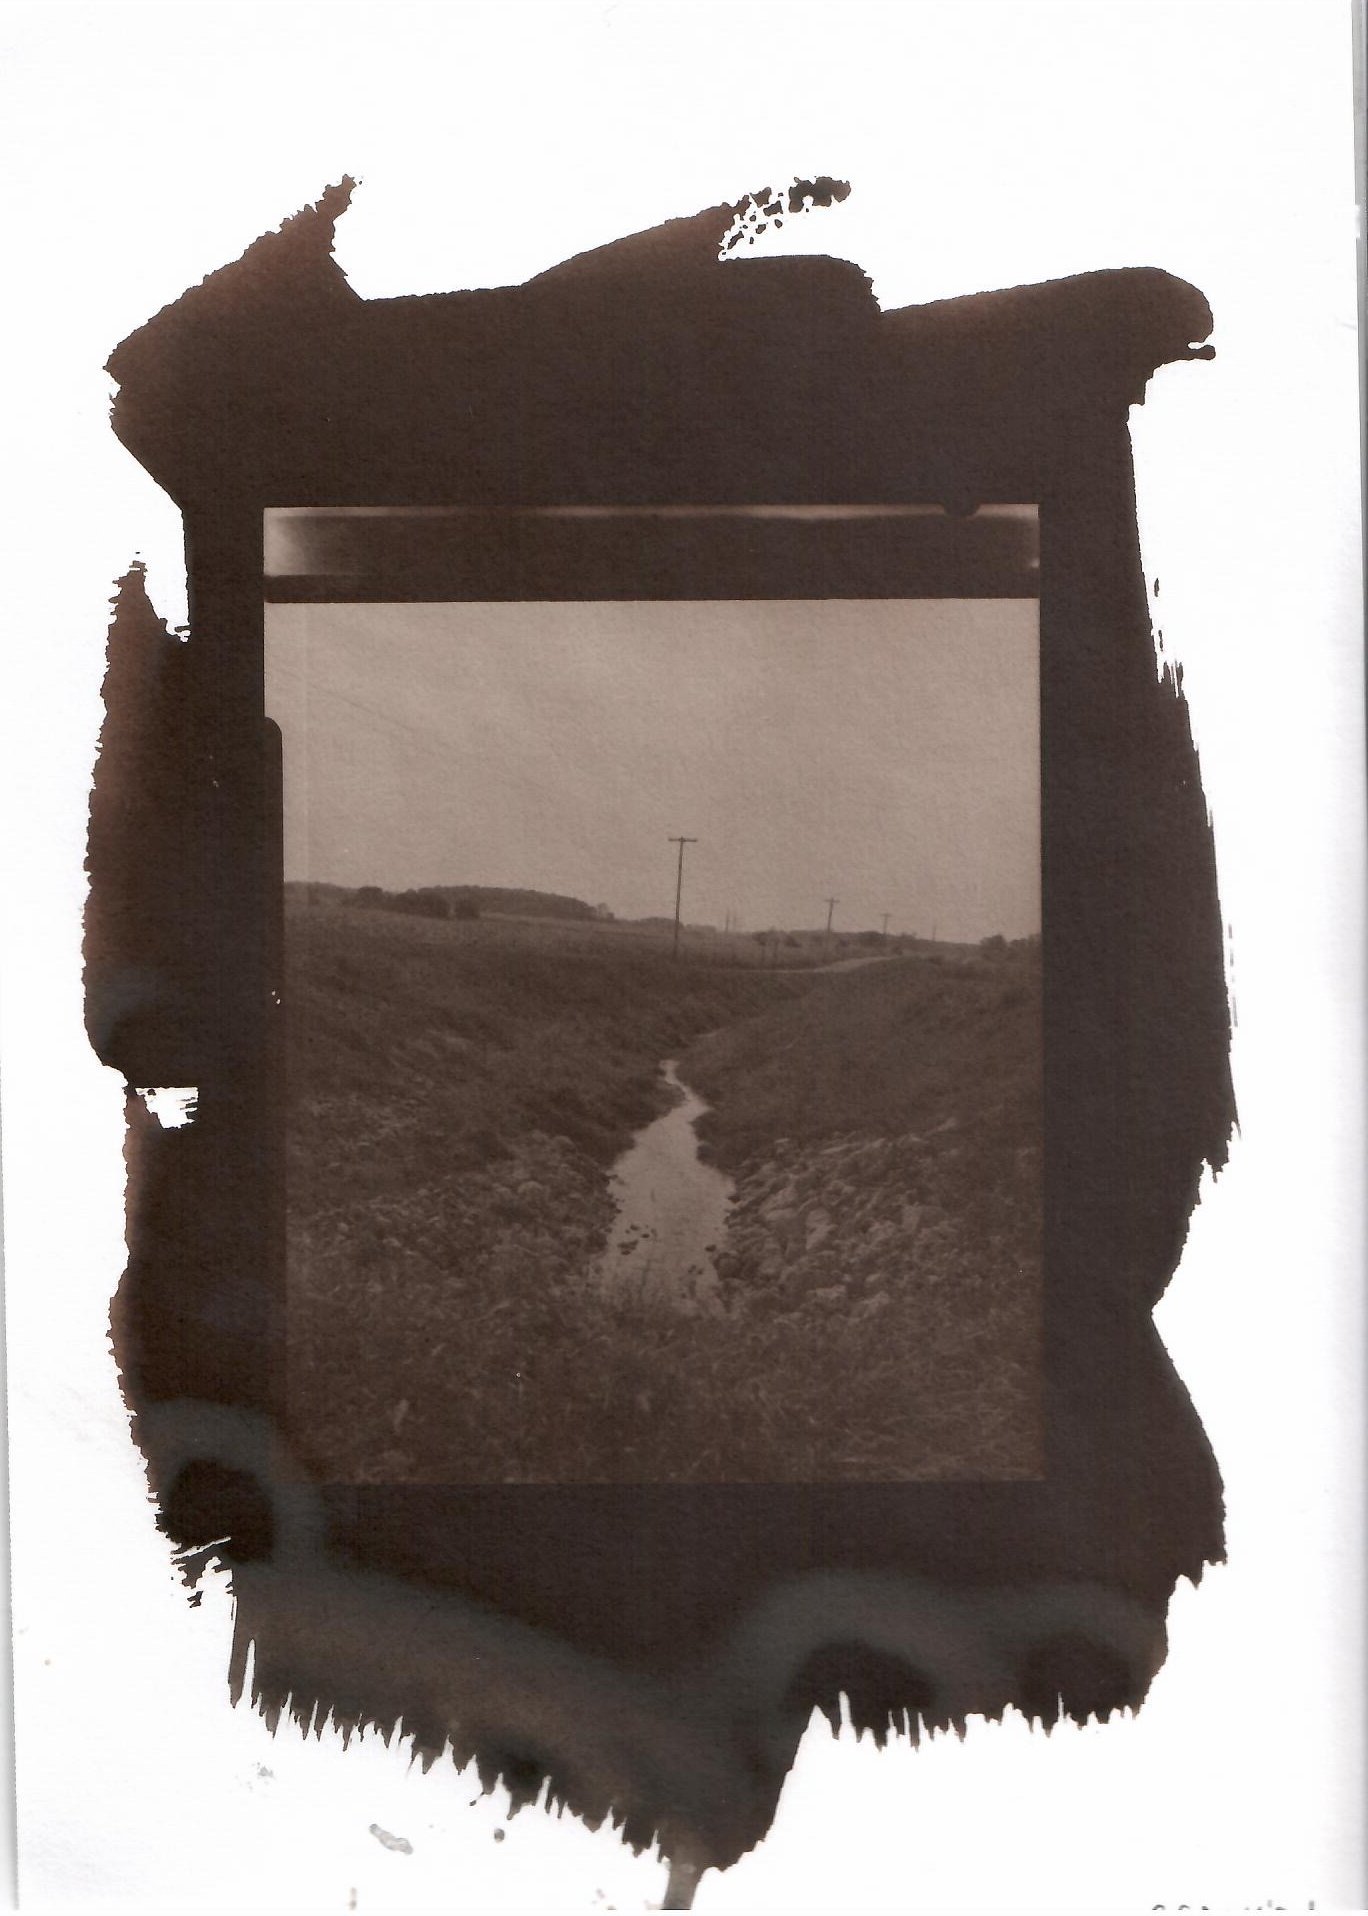  large format (4x5 inches) film van dyke brown contact print . 